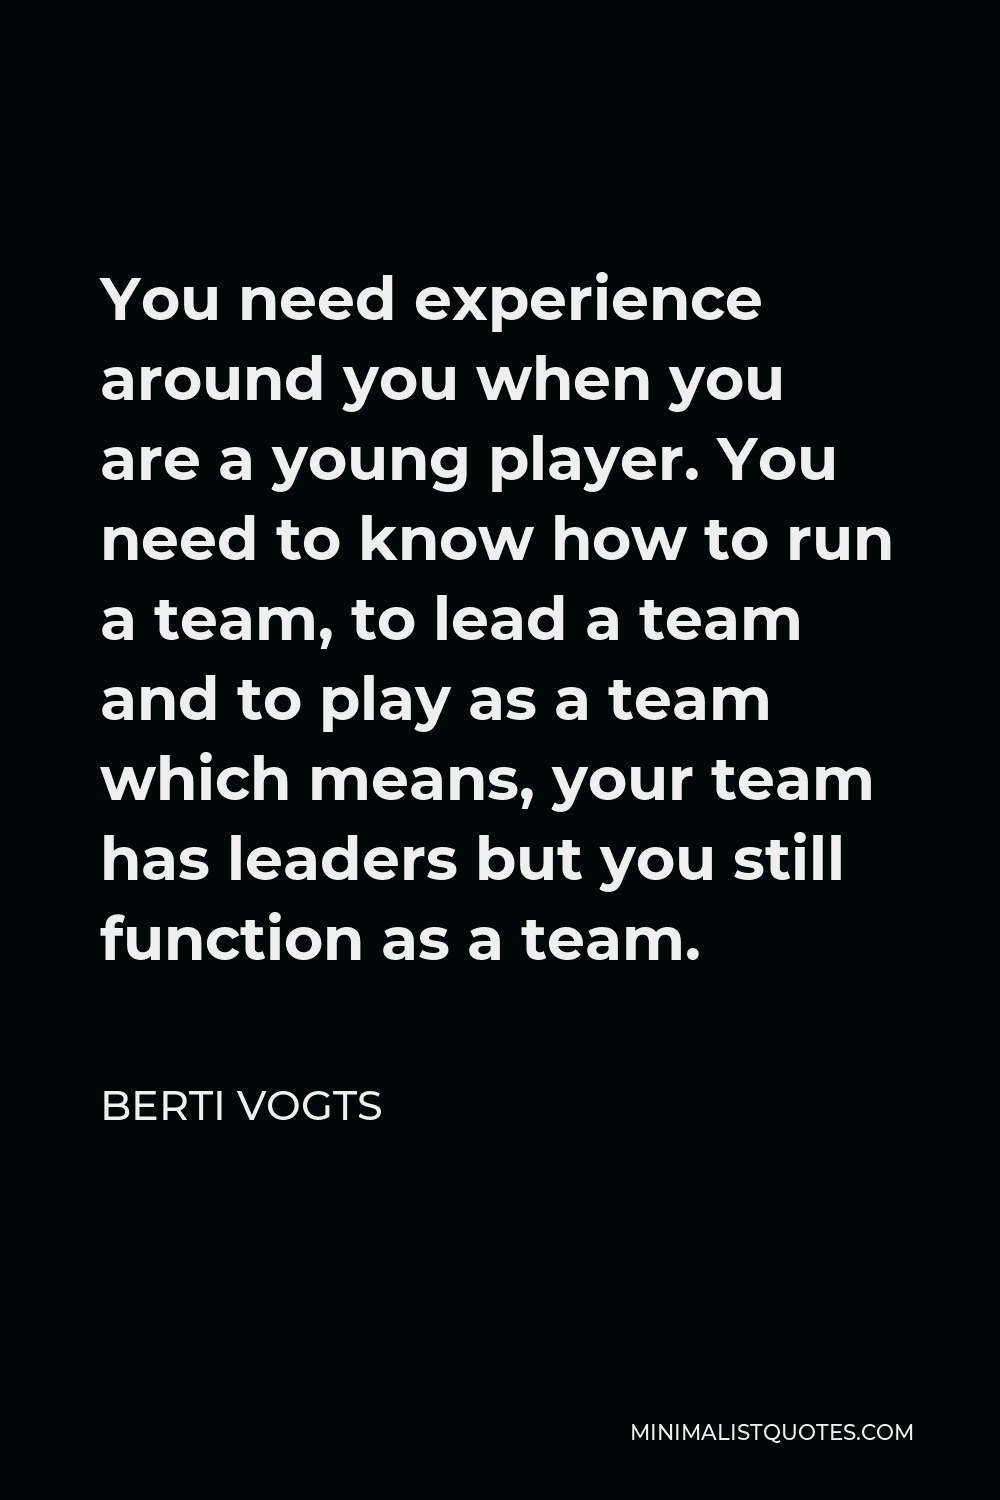 Berti Vogts Quote - You need experience around you when you are a young player. You need to know how to run a team, to lead a team and to play as a team which means, your team has leaders but you still function as a team.